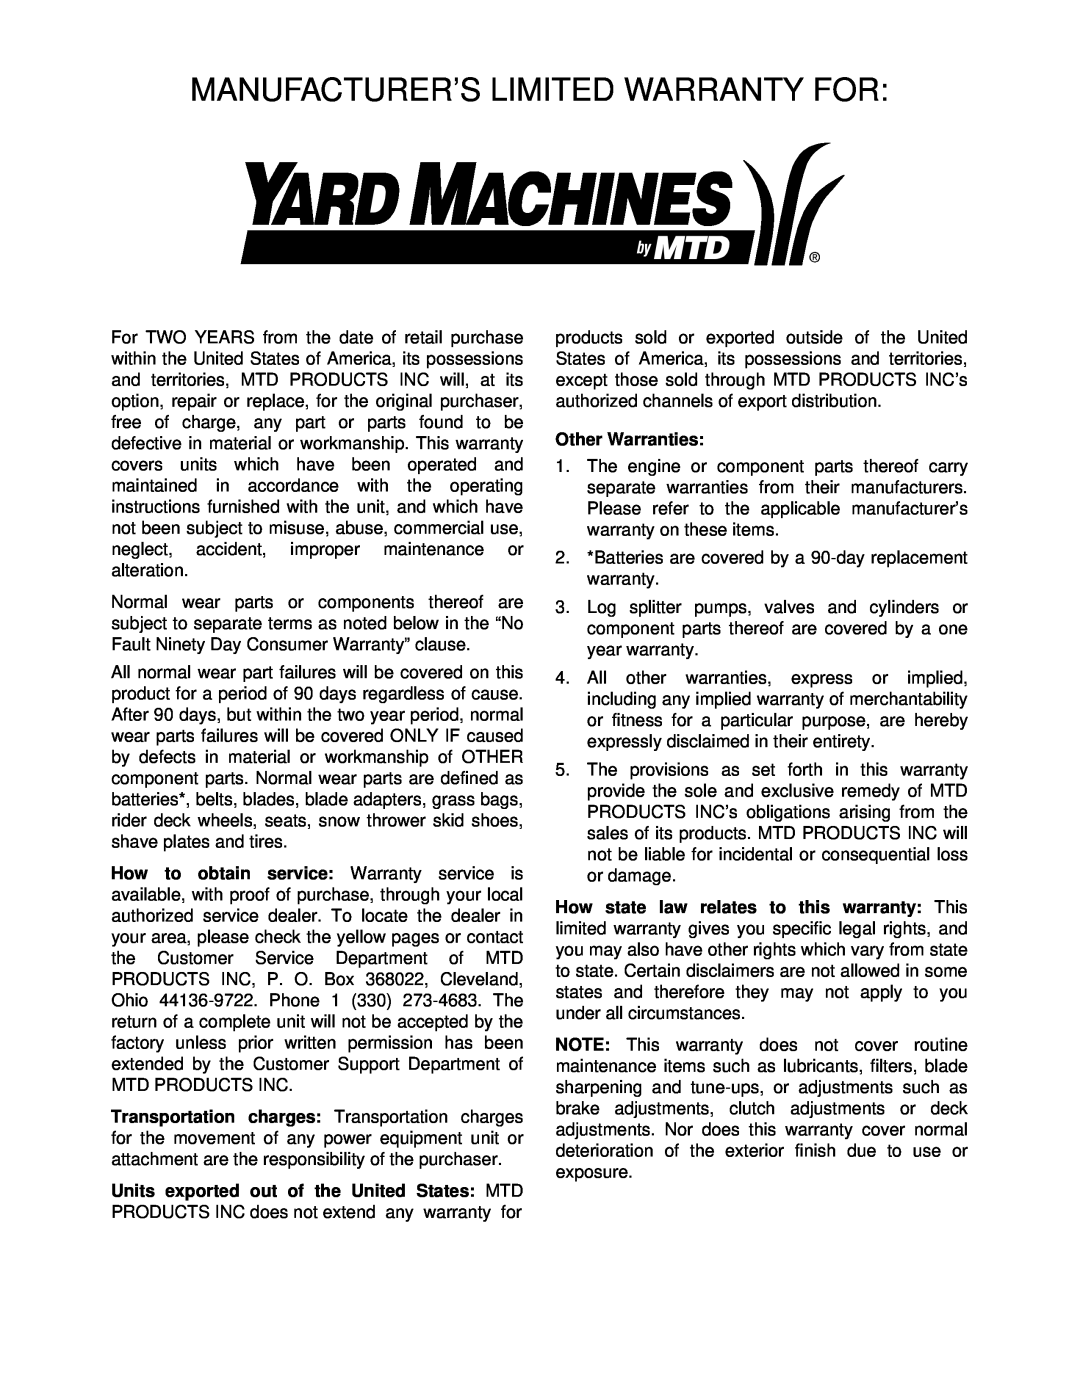 Yard Machines 580 Series manual Manufacturer’S Limited Warranty For 